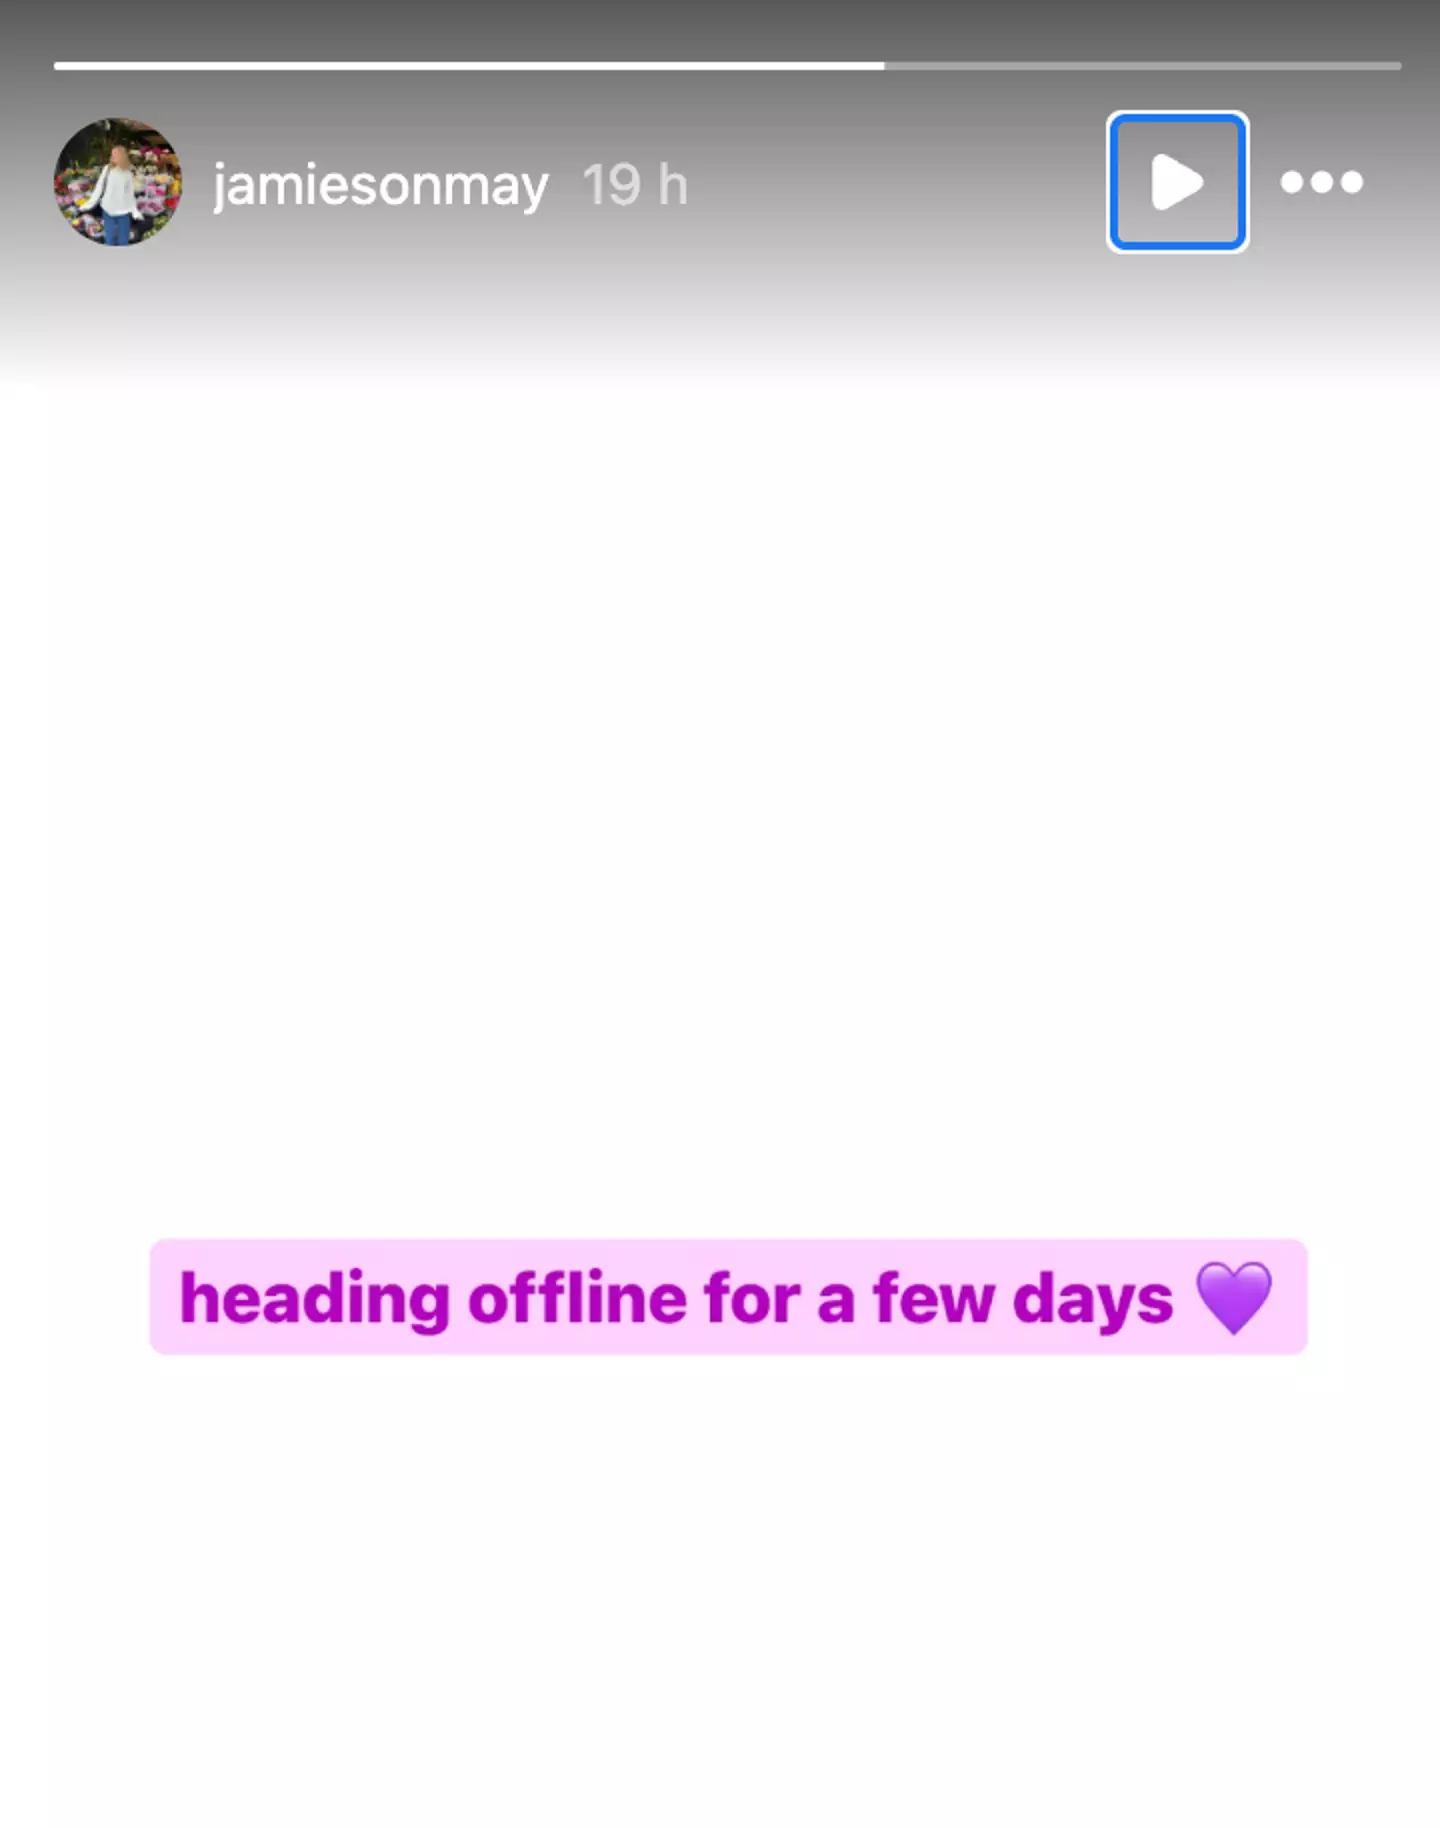 On her Instagram page, which has 15,600 followers, she shared the message saying ‘heading offline for a few days’.  (jamiesonmay/Instagram)